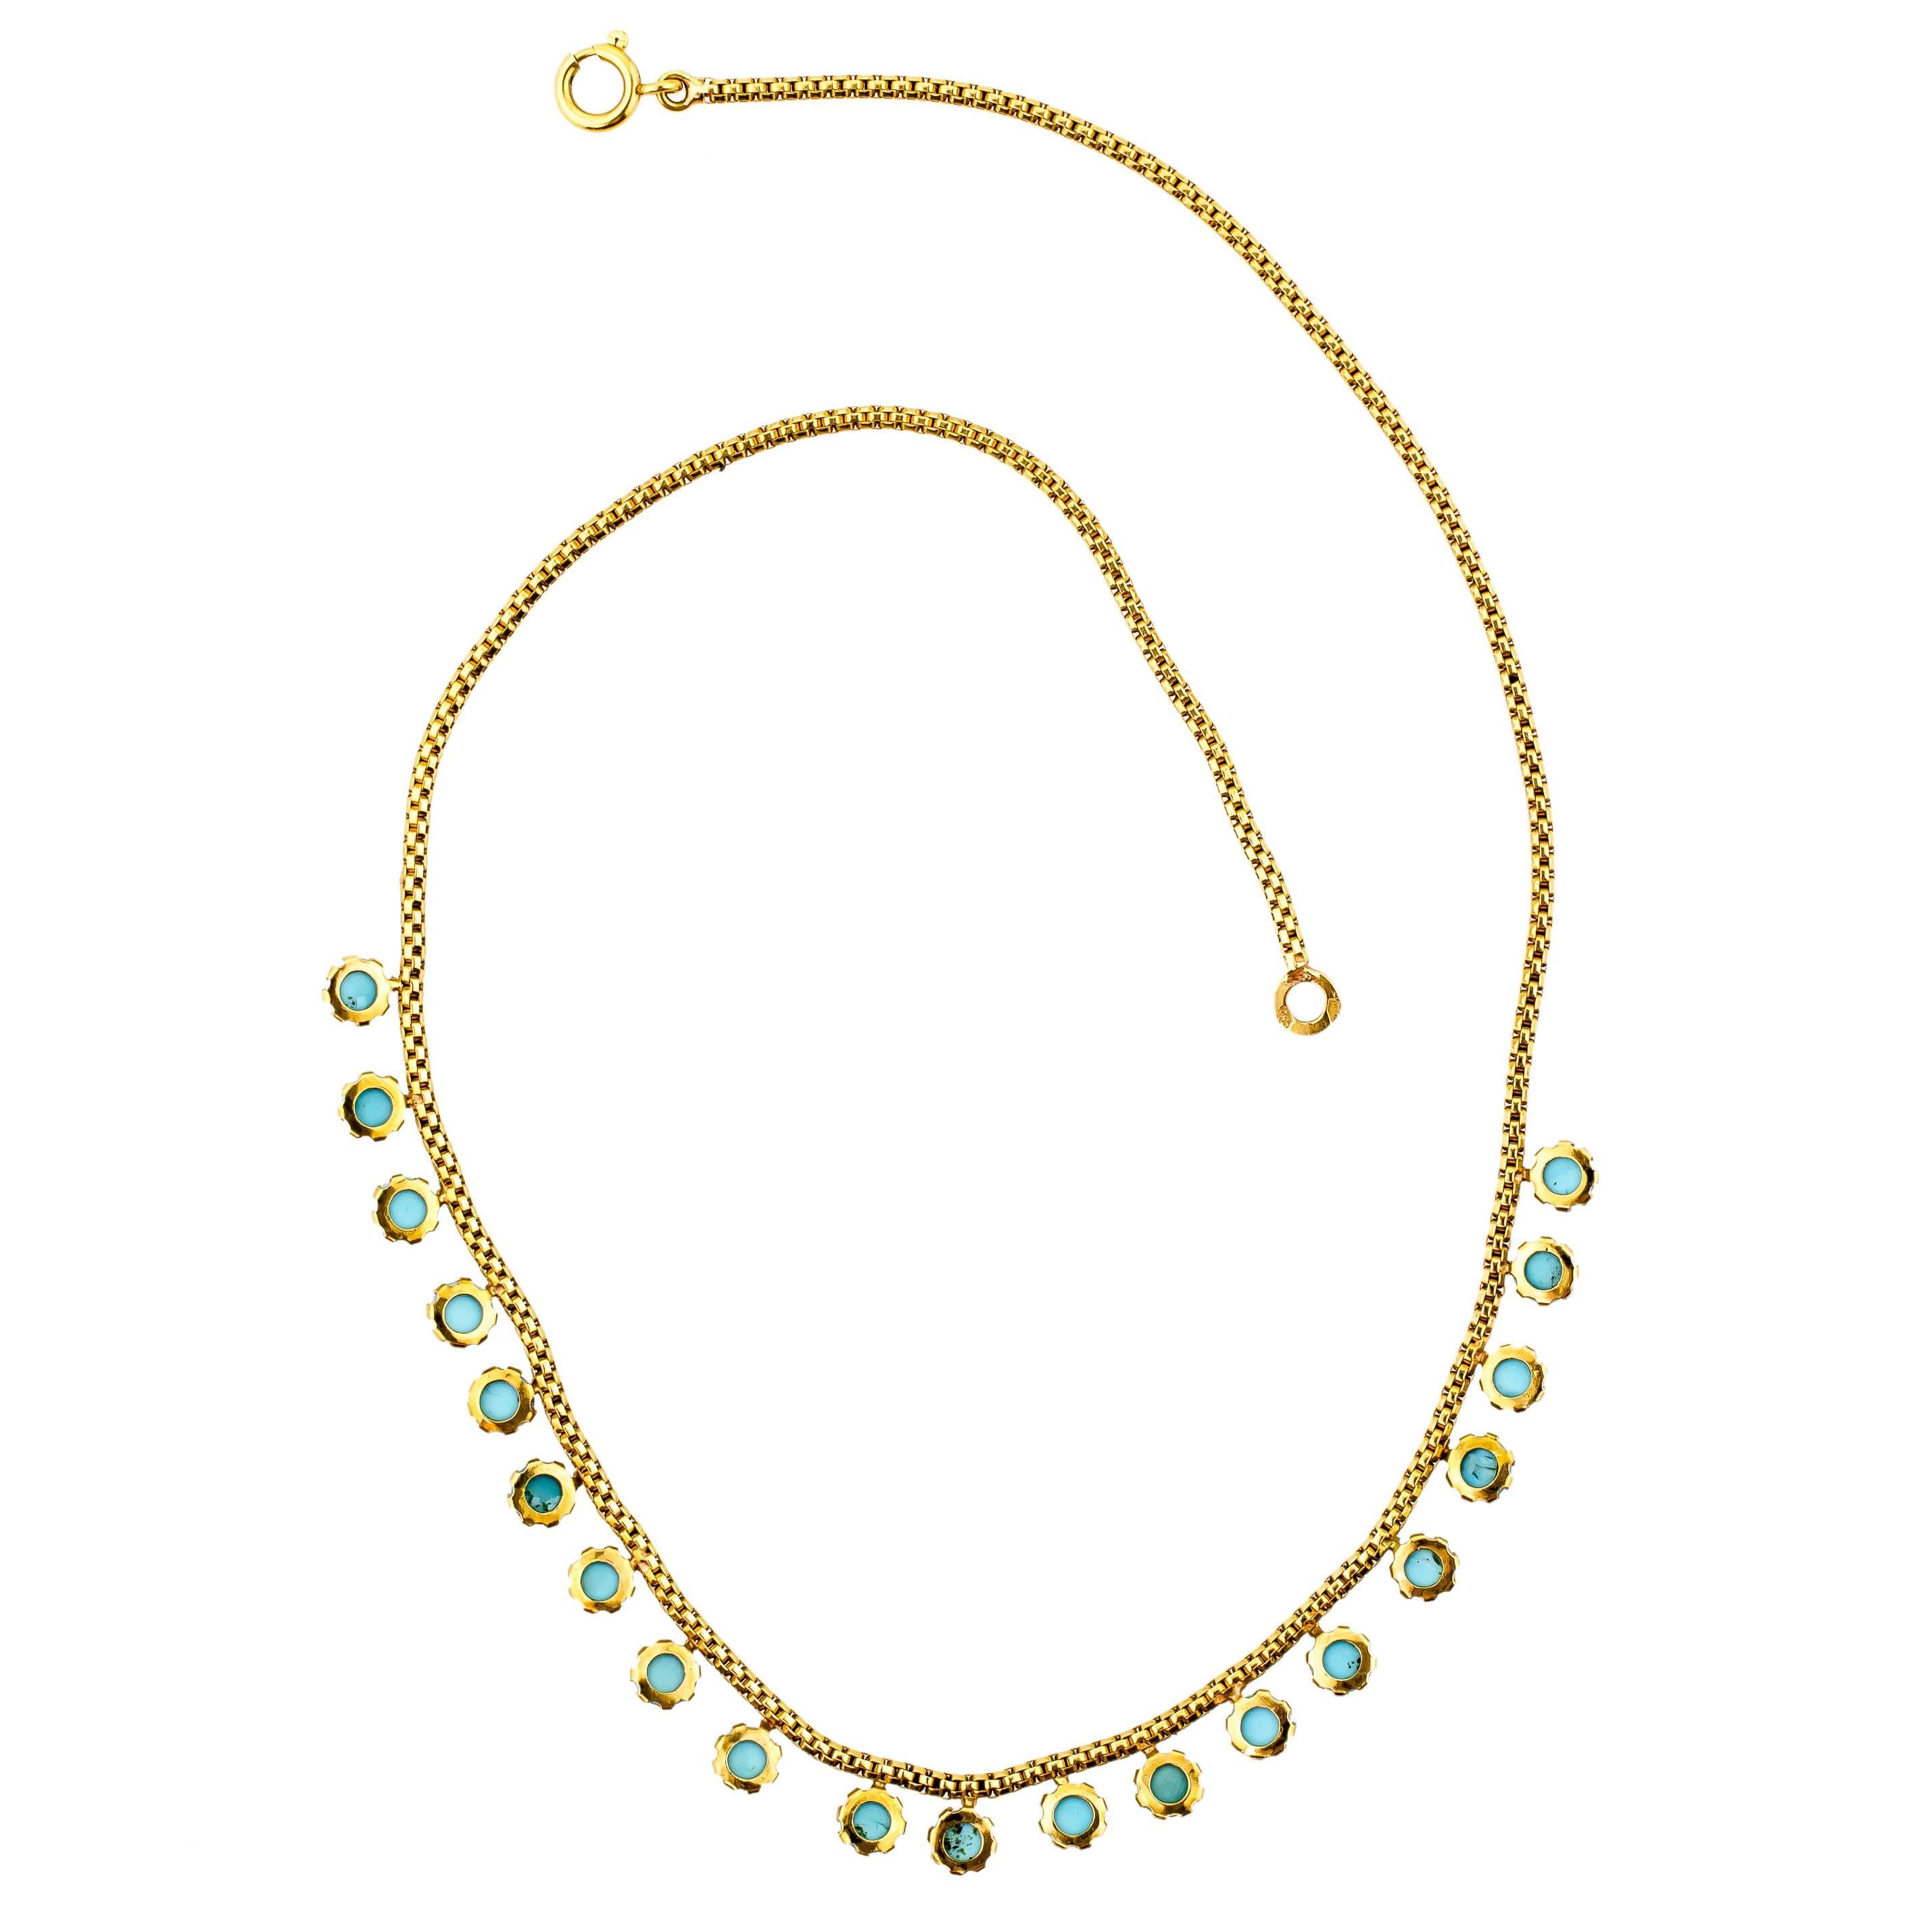 Women's Wonderful Turn of the Century Antique Turquoise and 18 Karat Gold Necklace